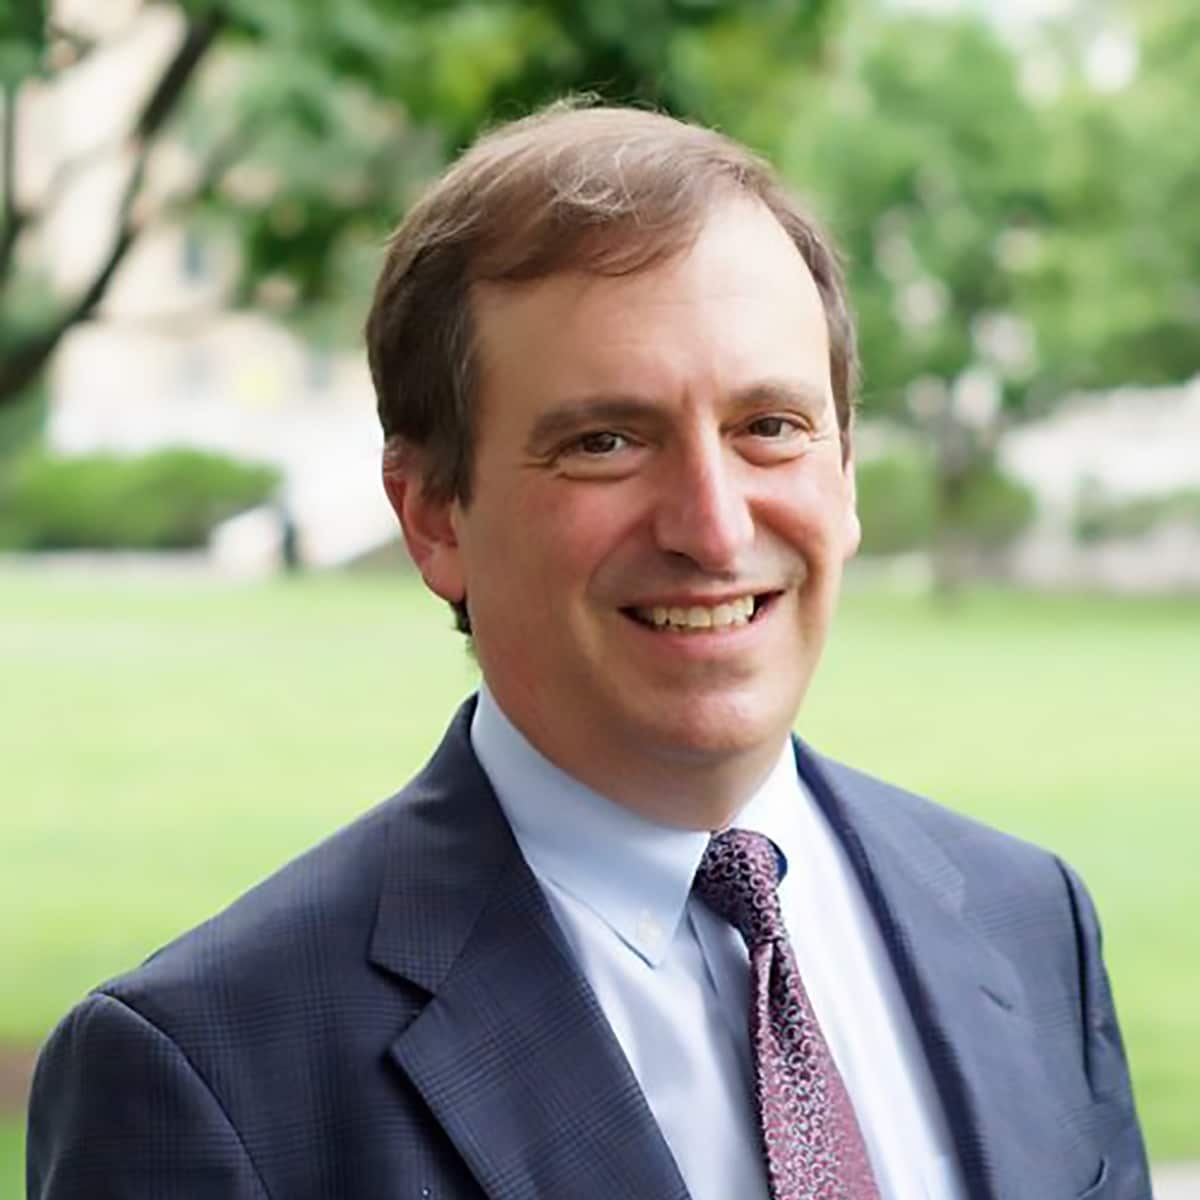 Marc Lipsitch, DPhil, is the senior advisor for the Center of Forecasting and Outbreak Analytics. He has short brown hair, smiling, wearing a grey suit, against a background of green grass and trees.